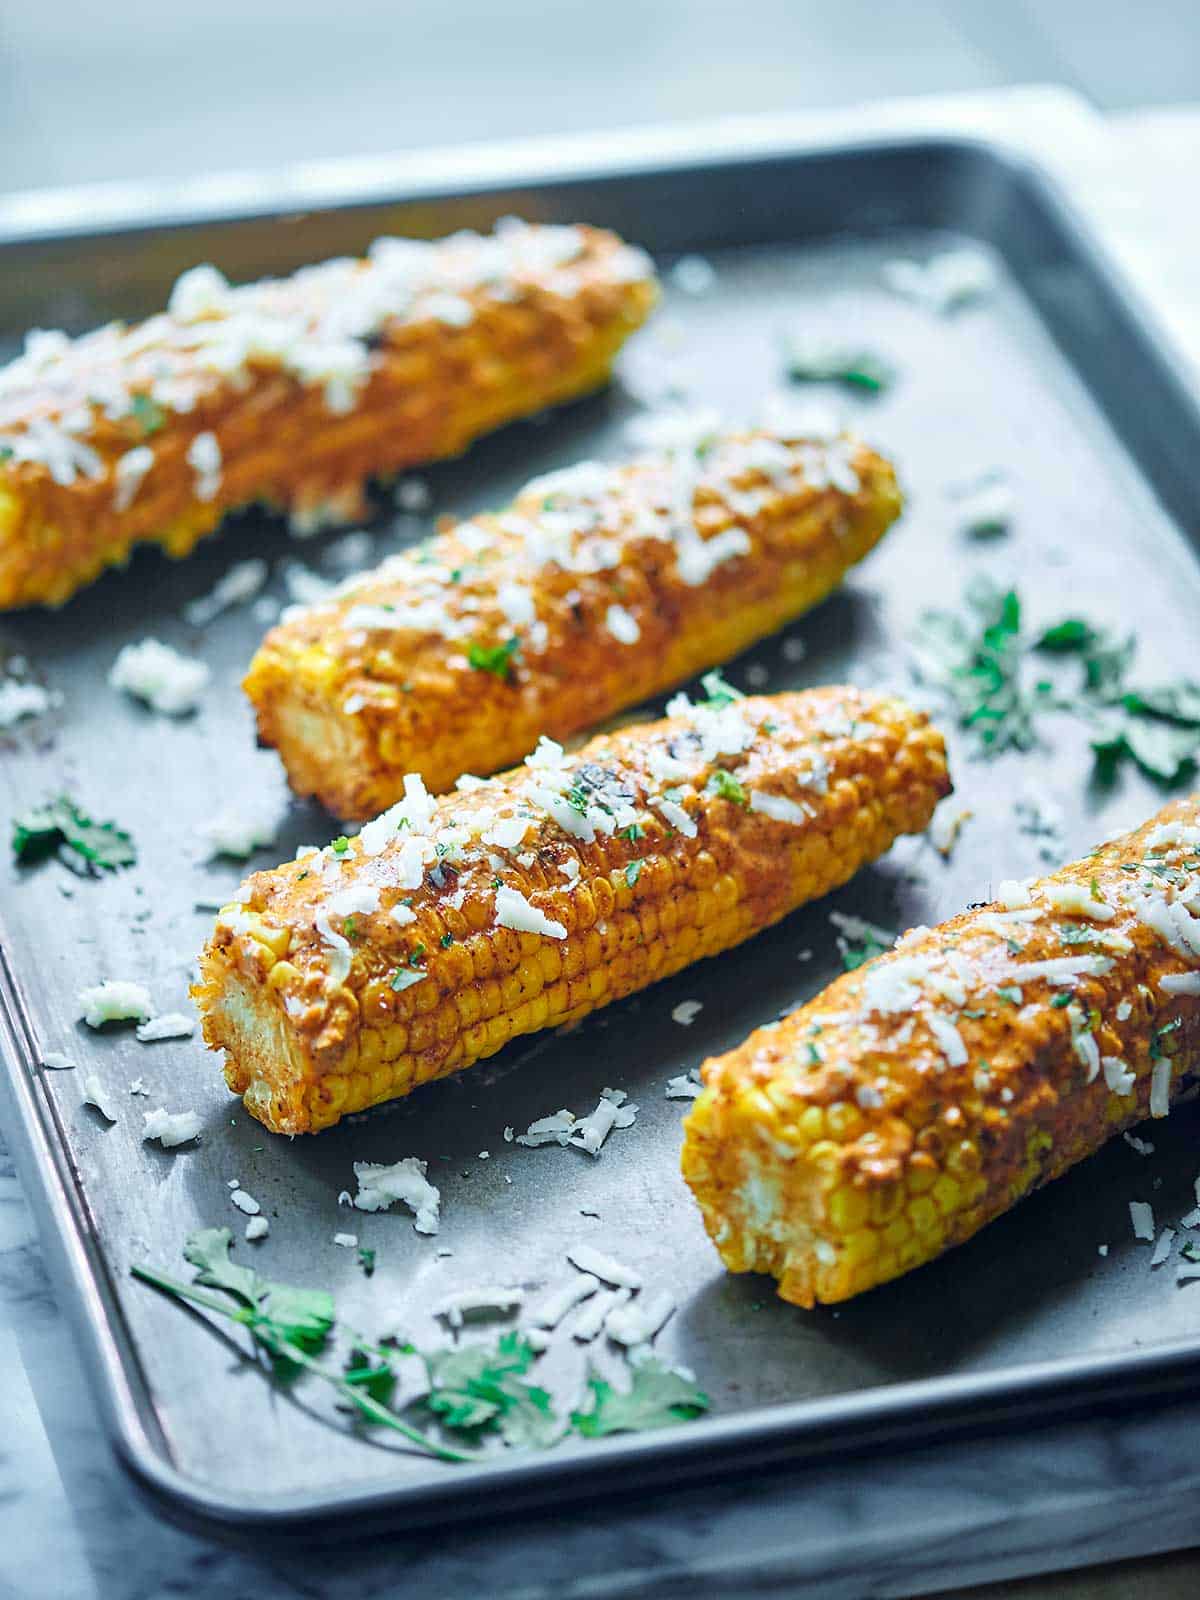 Mexican Grilled Corn. Grilled corn that’s smothered in a creamy, smoky butter and topped with salty Mexican cheese - cotija - and fresh cilantro! showmetheyummy.com #grilling #corn #mexican #cheese #butter